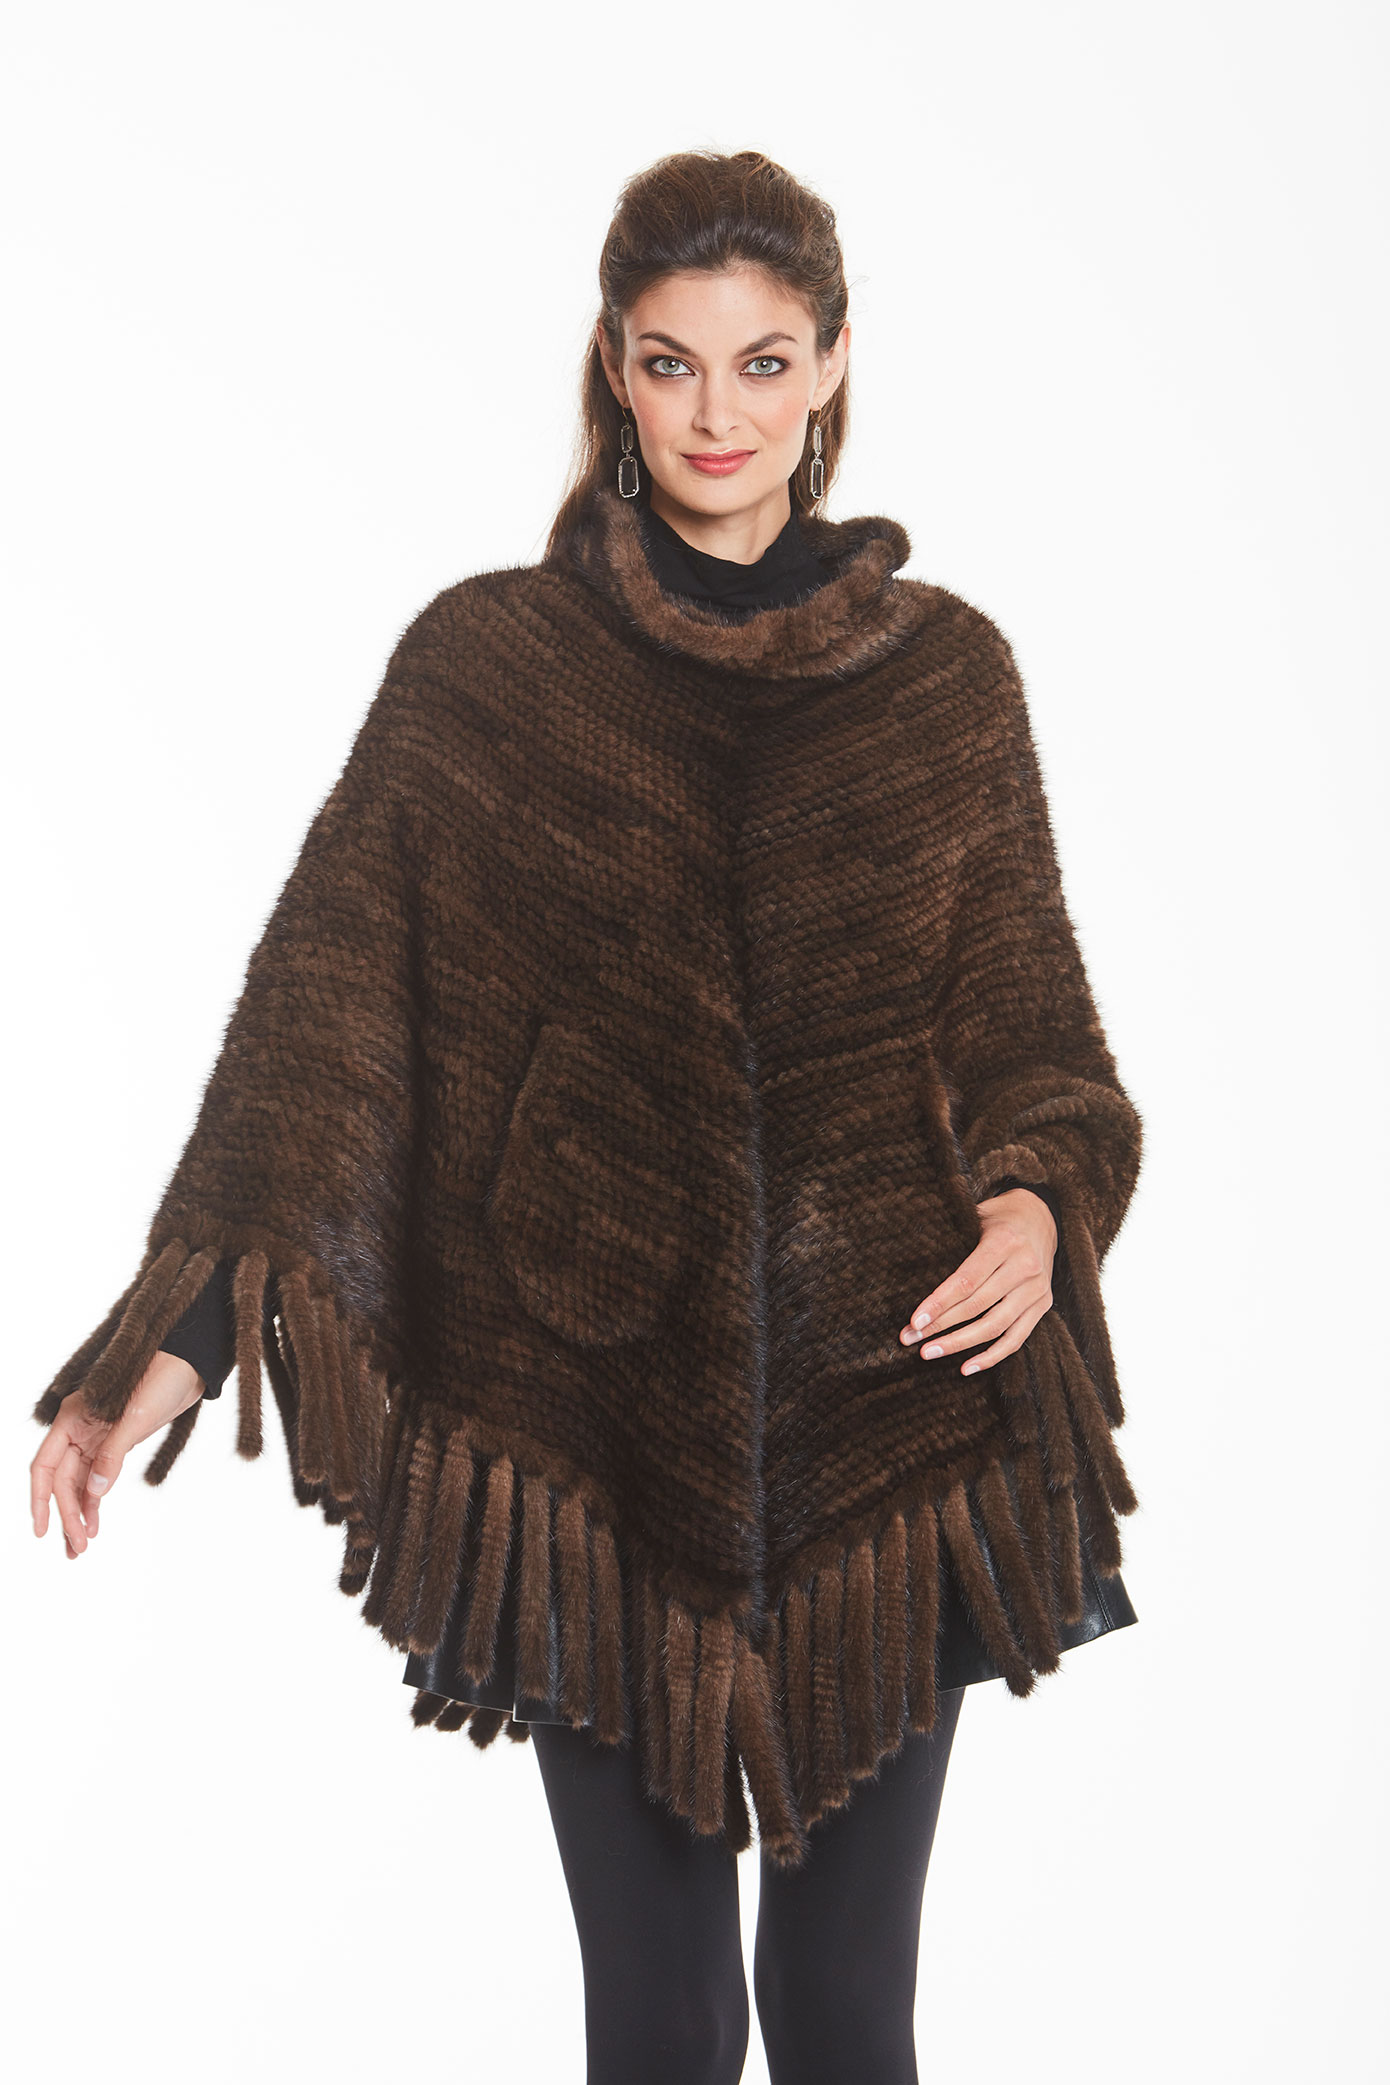 Mink Fur Poncho Cape – Brown Knitted Madison Avenue